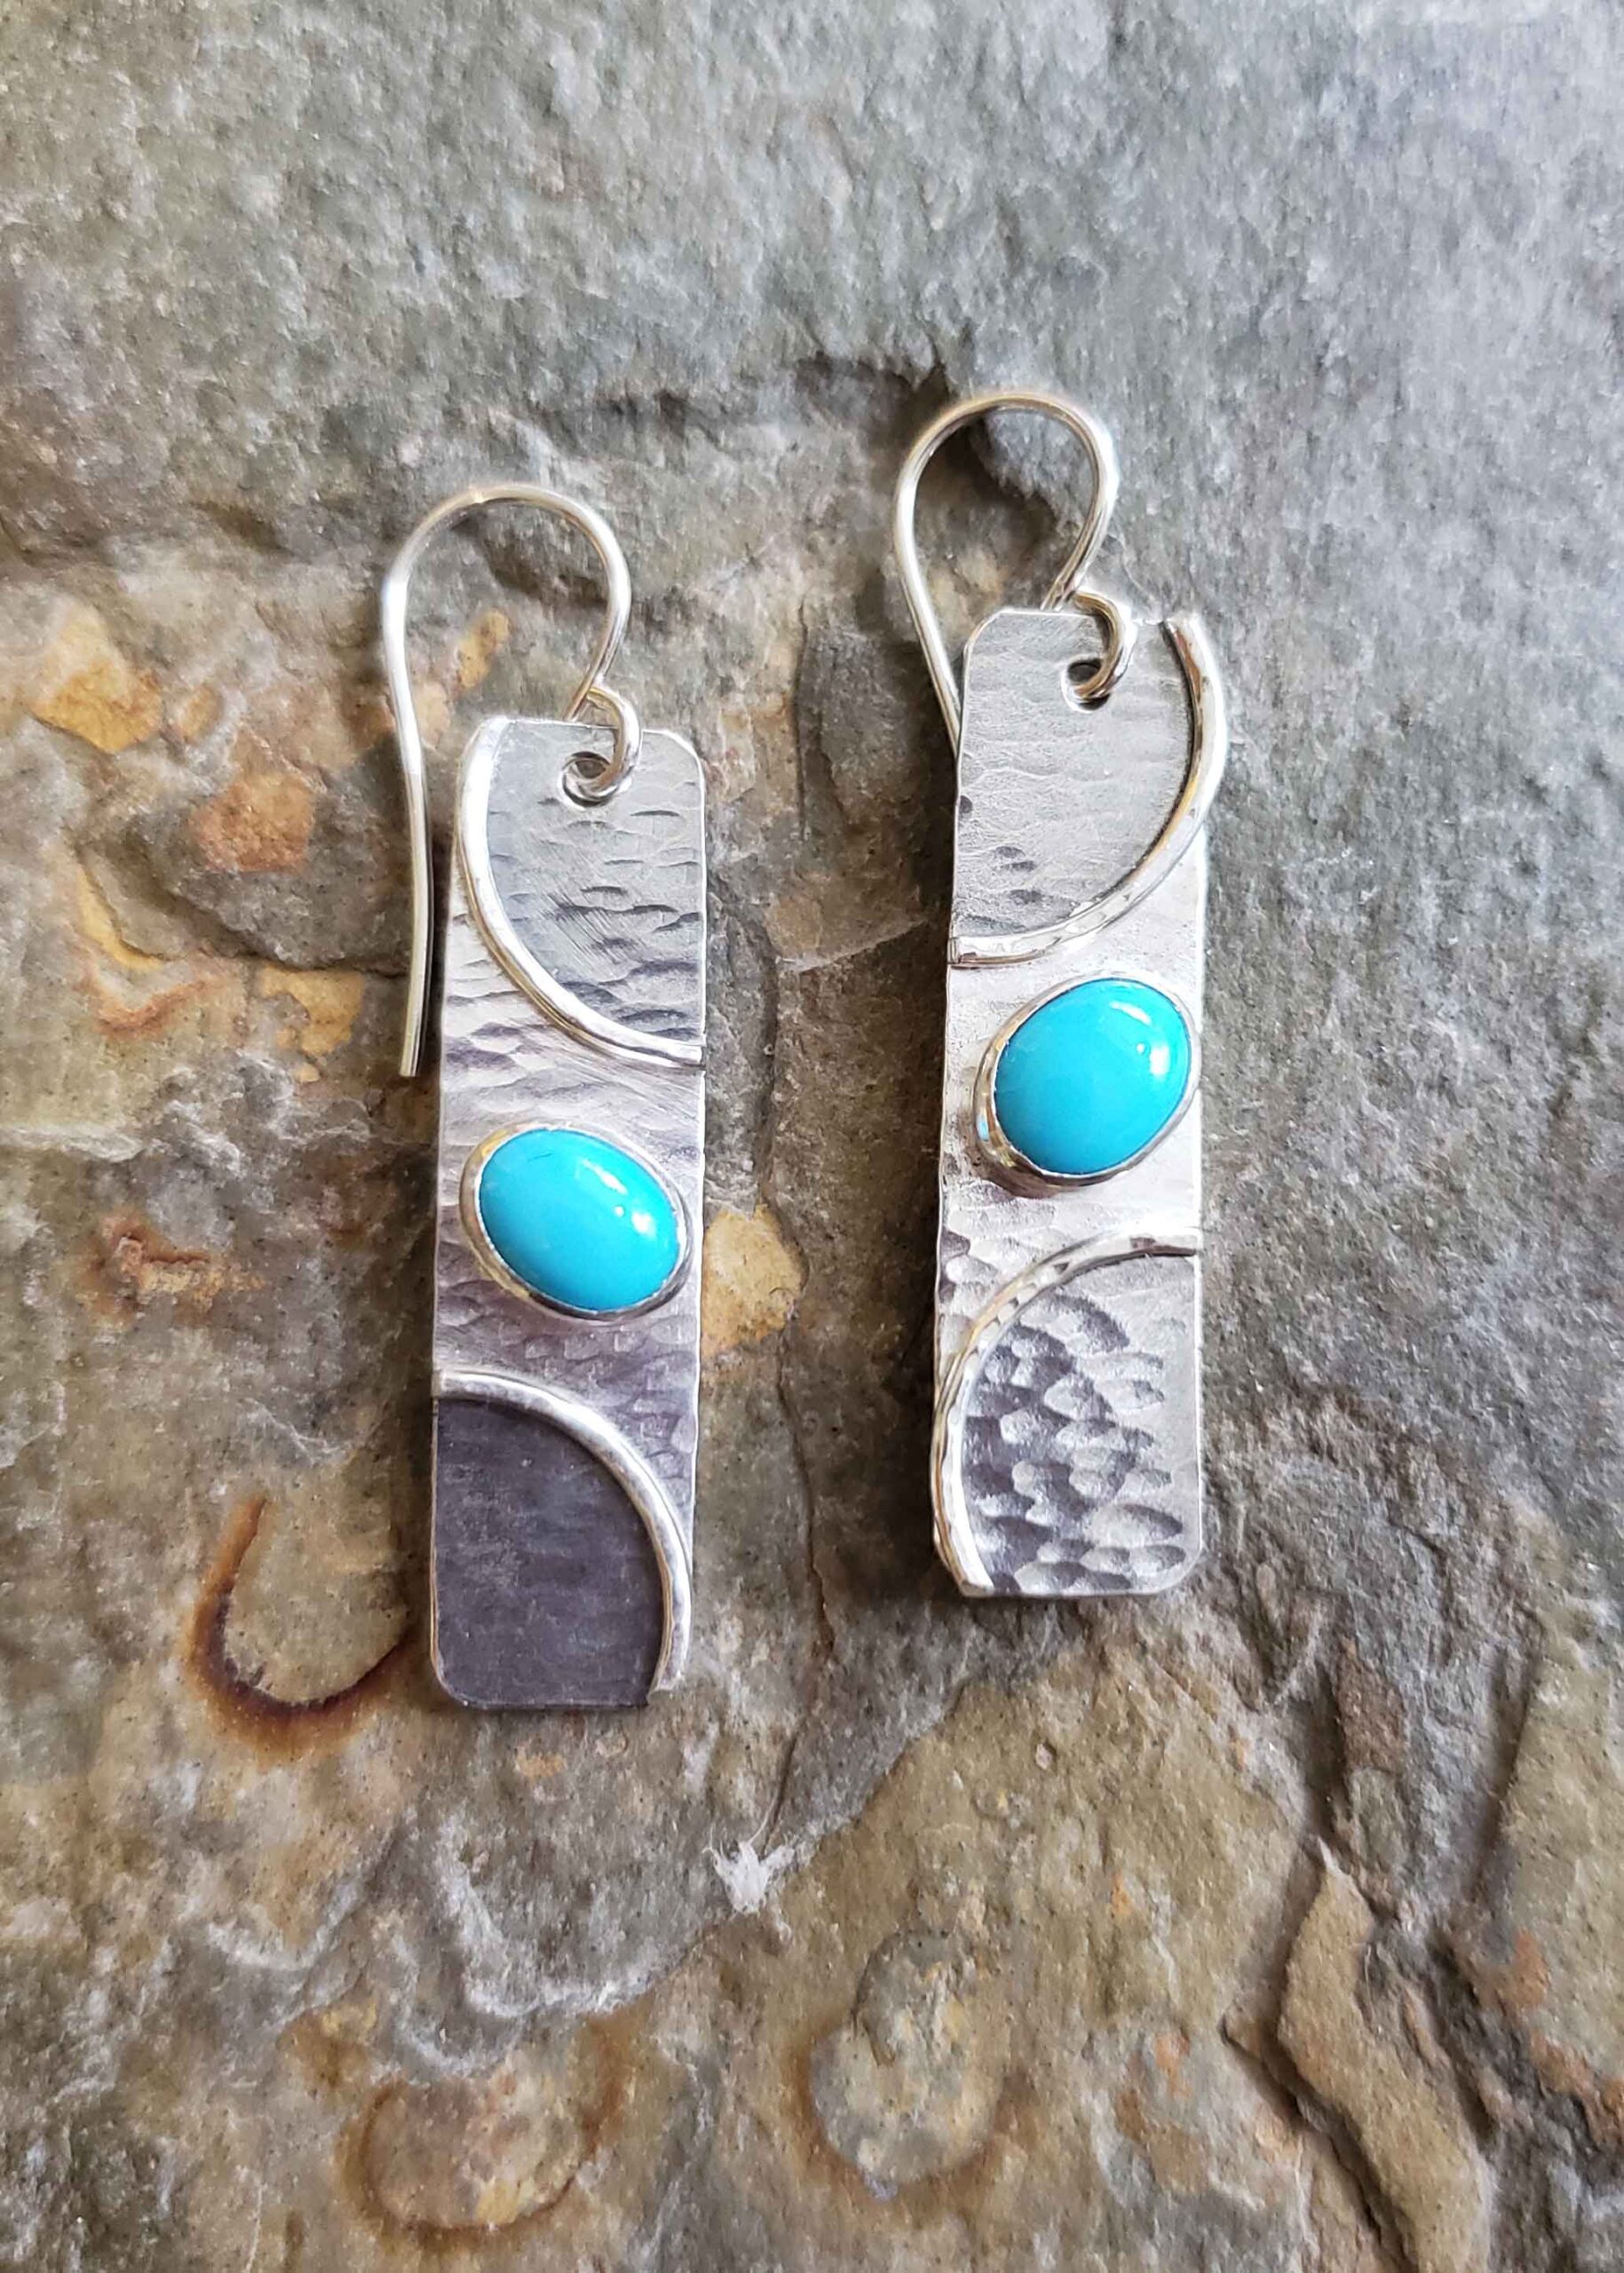 Silver and turquoise earrings by Dona Miller.